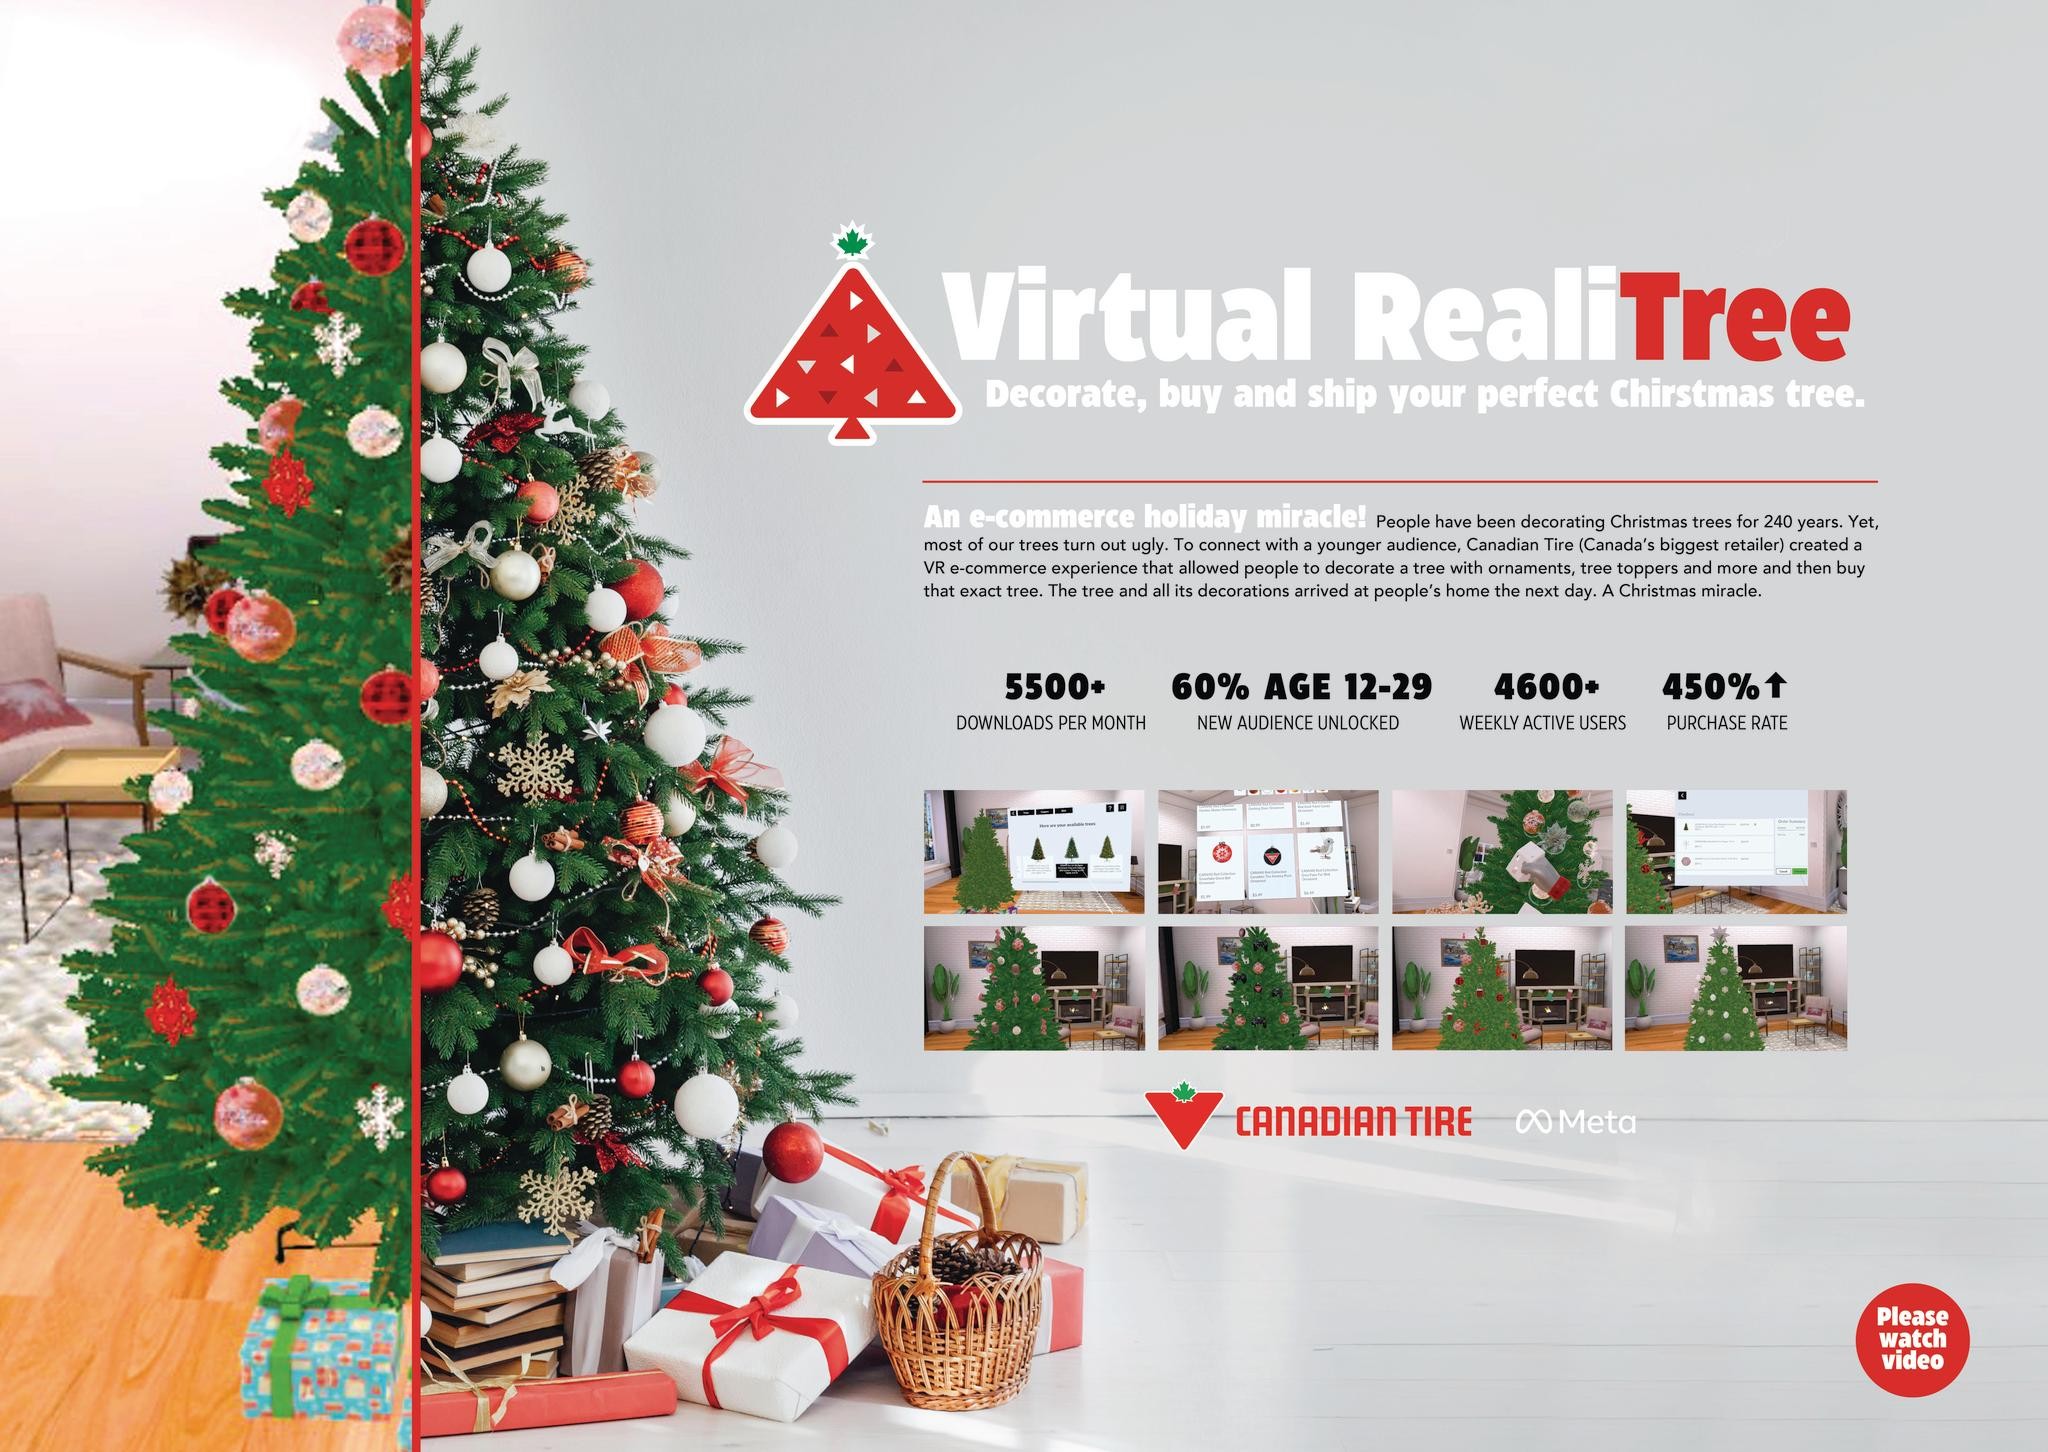 Canadian Tire's Virtual Realitree